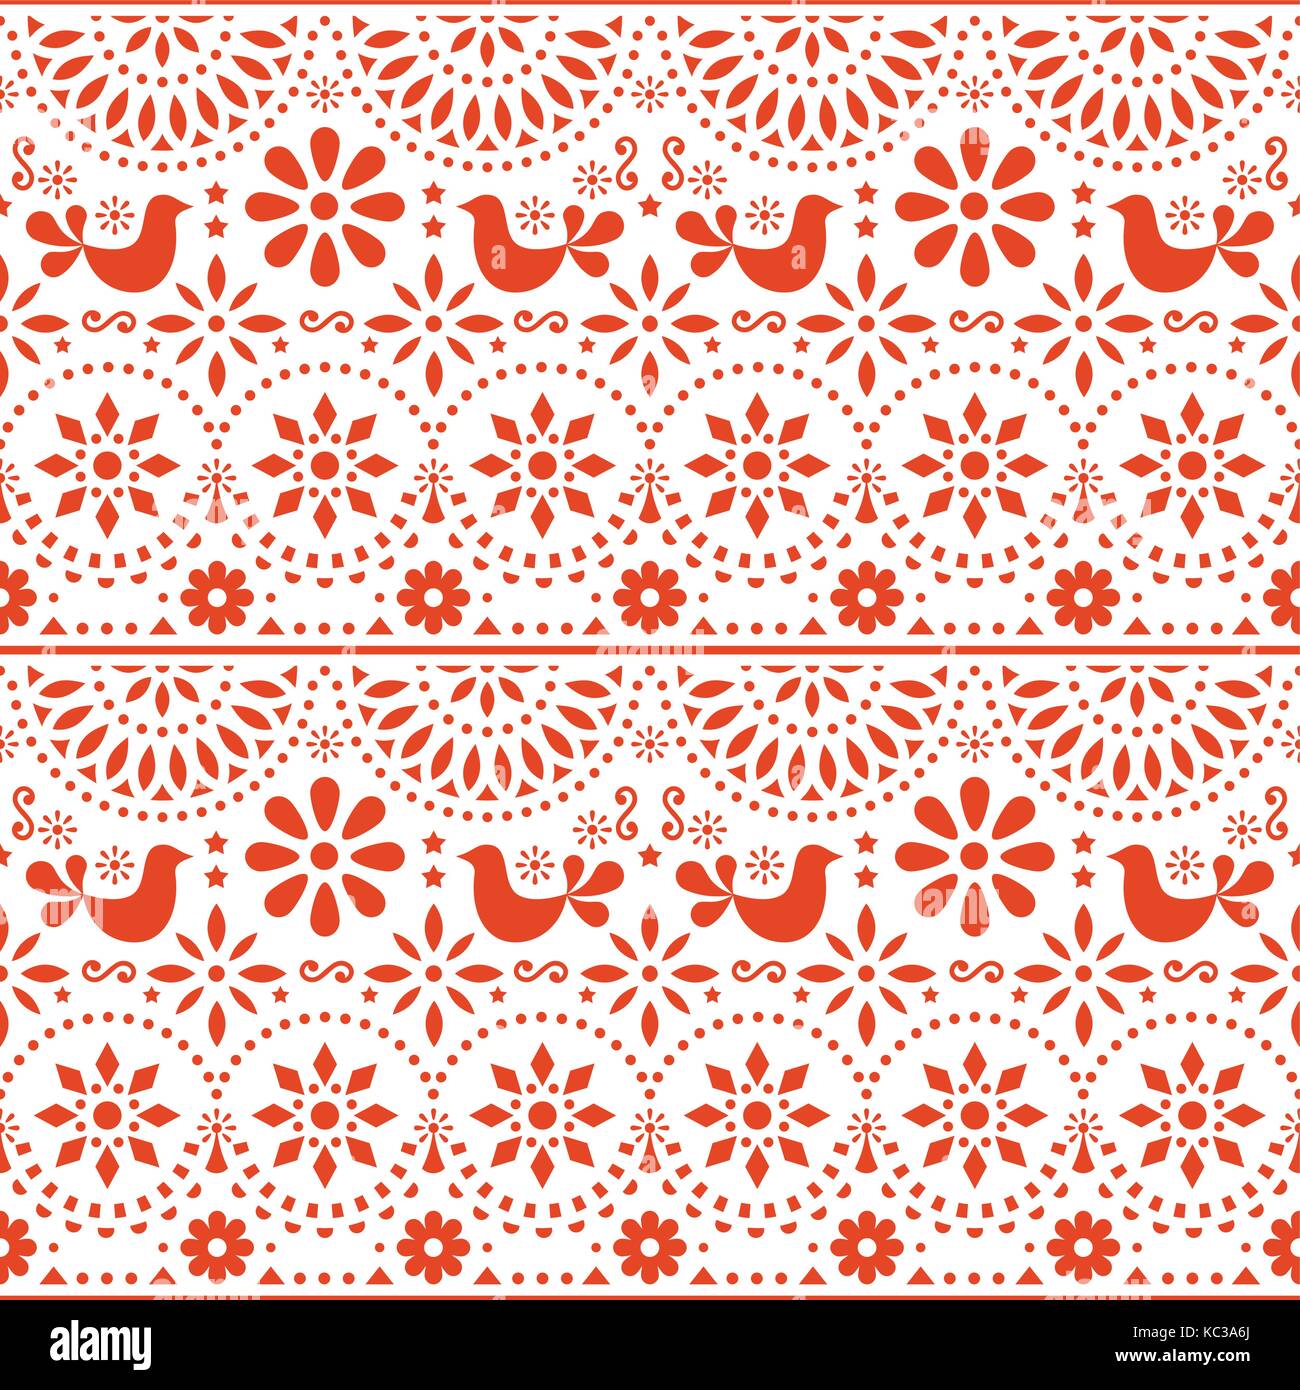 Mexican folk art vector seamless pattern with birds and flowers, red fiesta design inspired by traditional art form Mexico Stock Vector